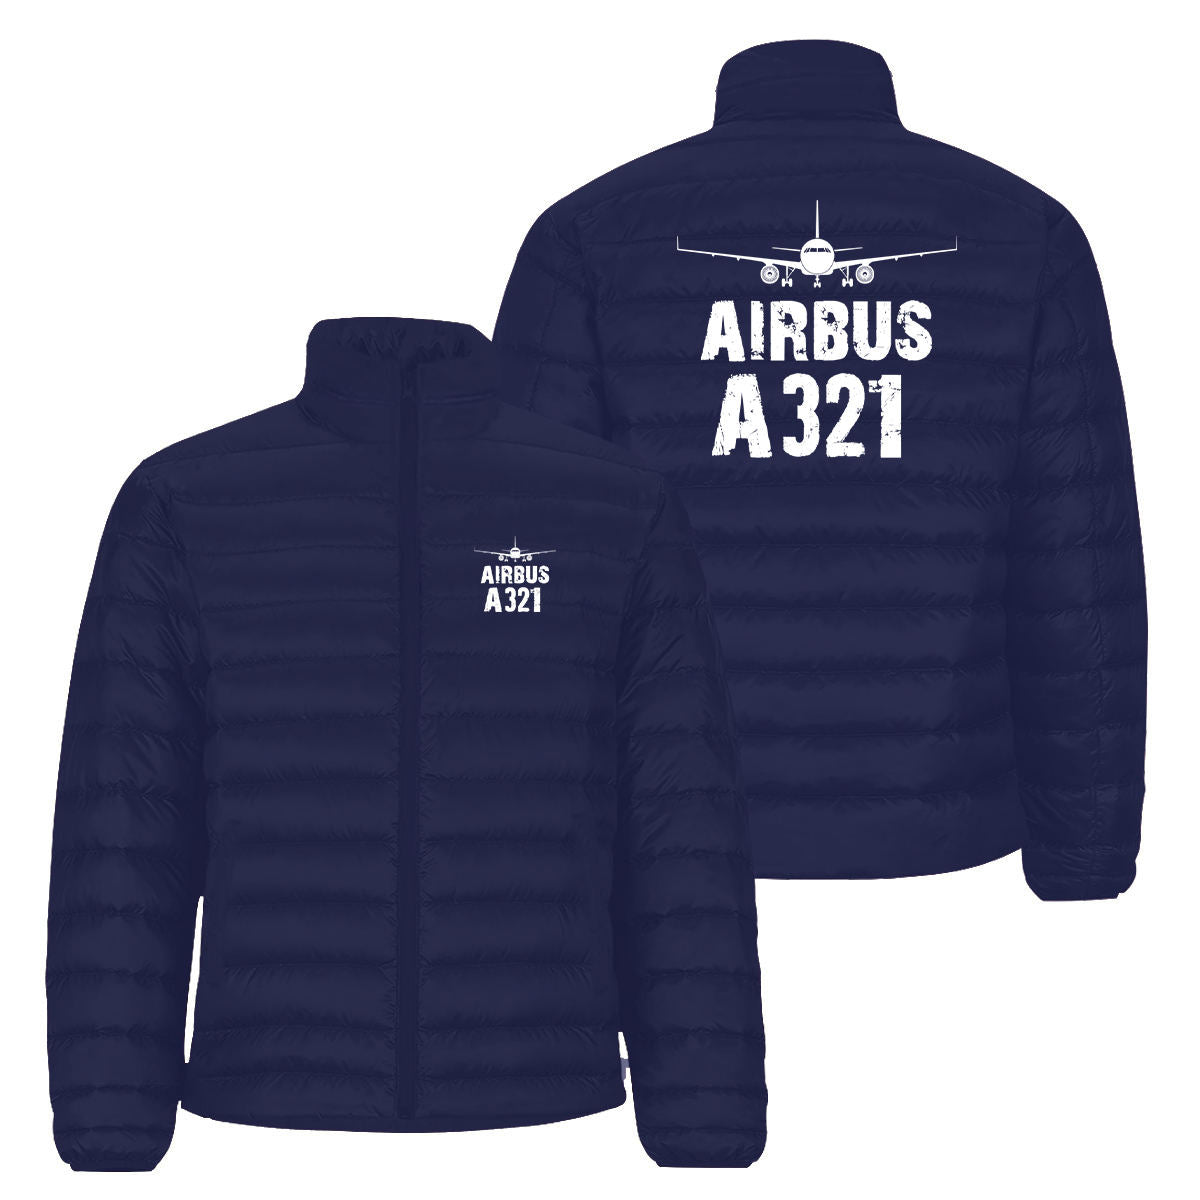 Airbus A321 & Plane Designed Padded Jackets